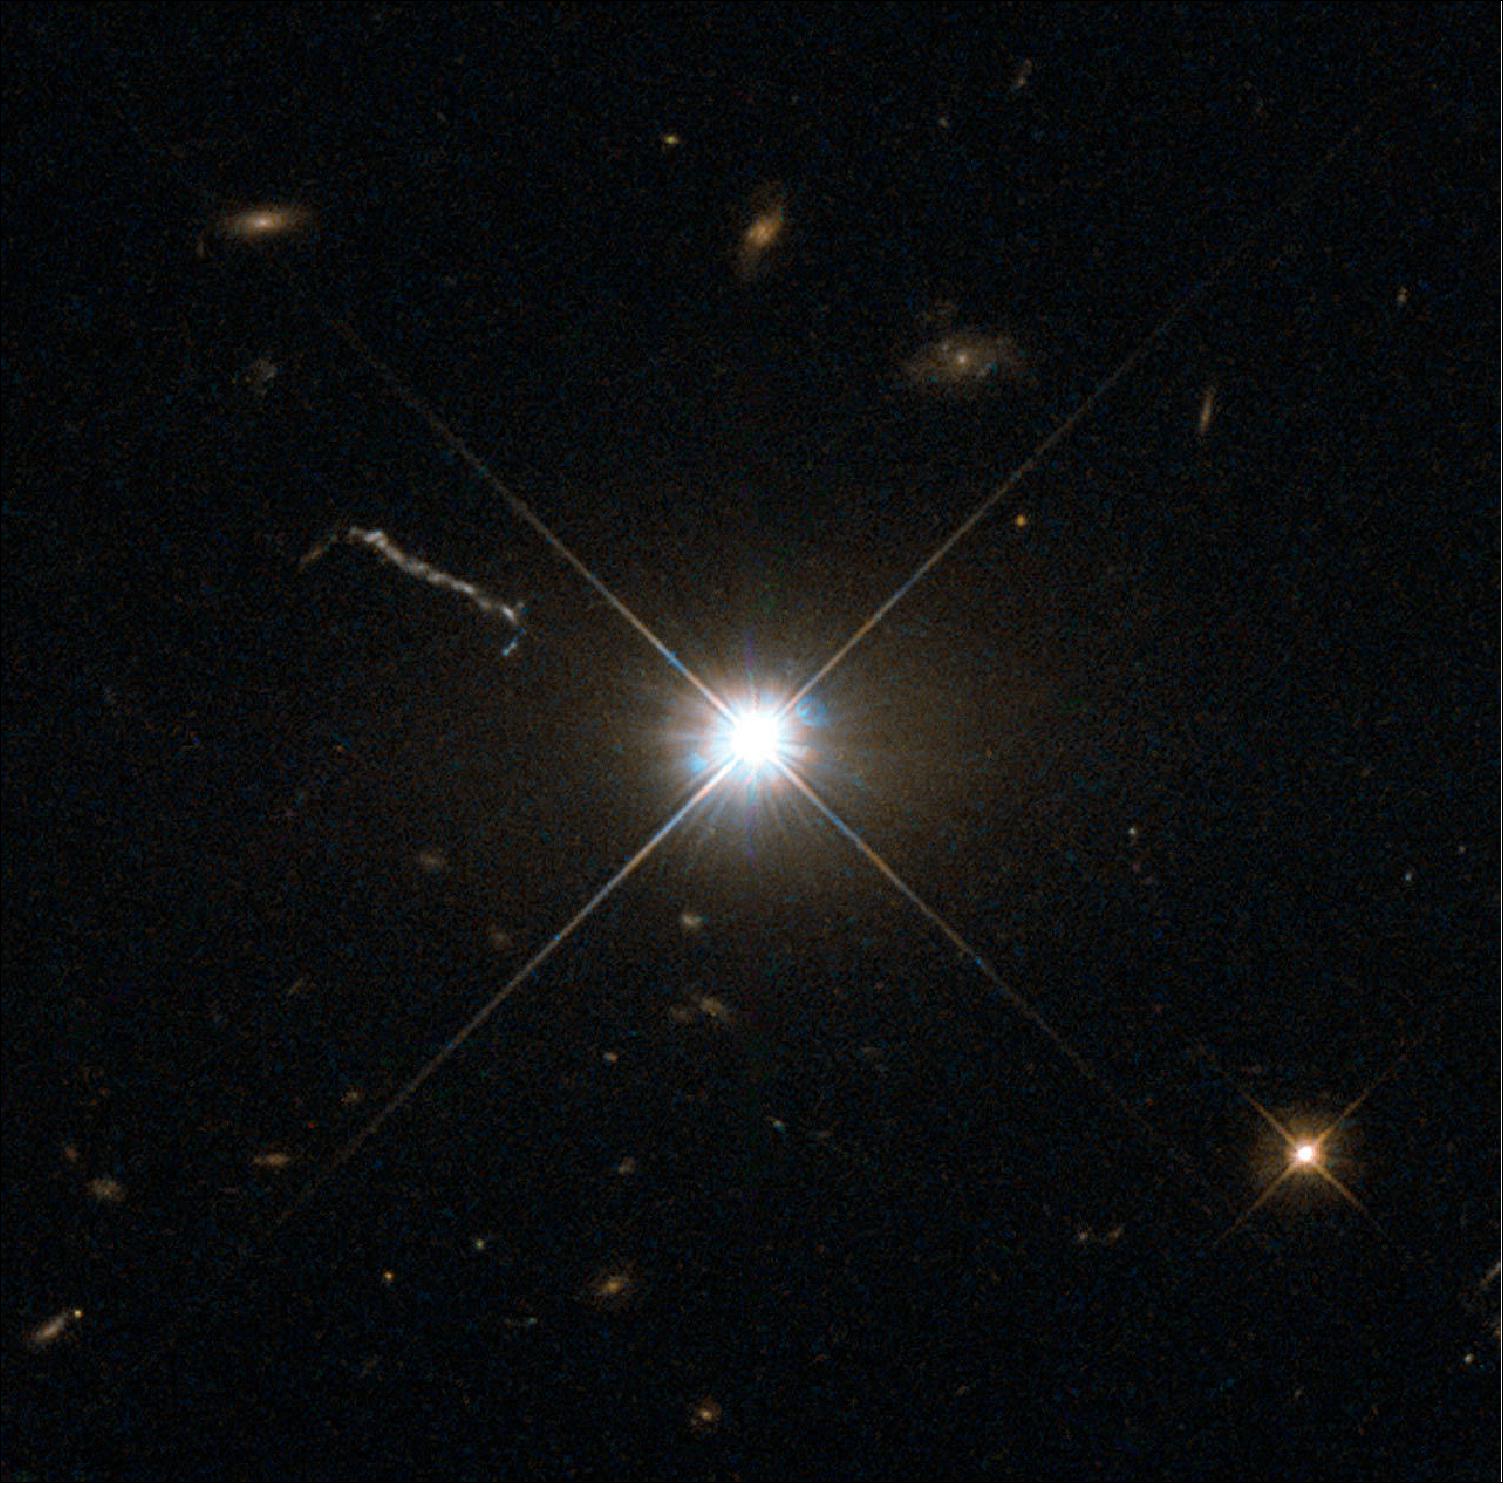 Figure 57: Powerhouse in space: The quasar 3C273 resides in a giant elliptical galaxy in the constellation of Virgo at a distance of about 2.5 billion light years. It was the first quasar ever to be identified (image credit: ESA/Hubble & NASA)